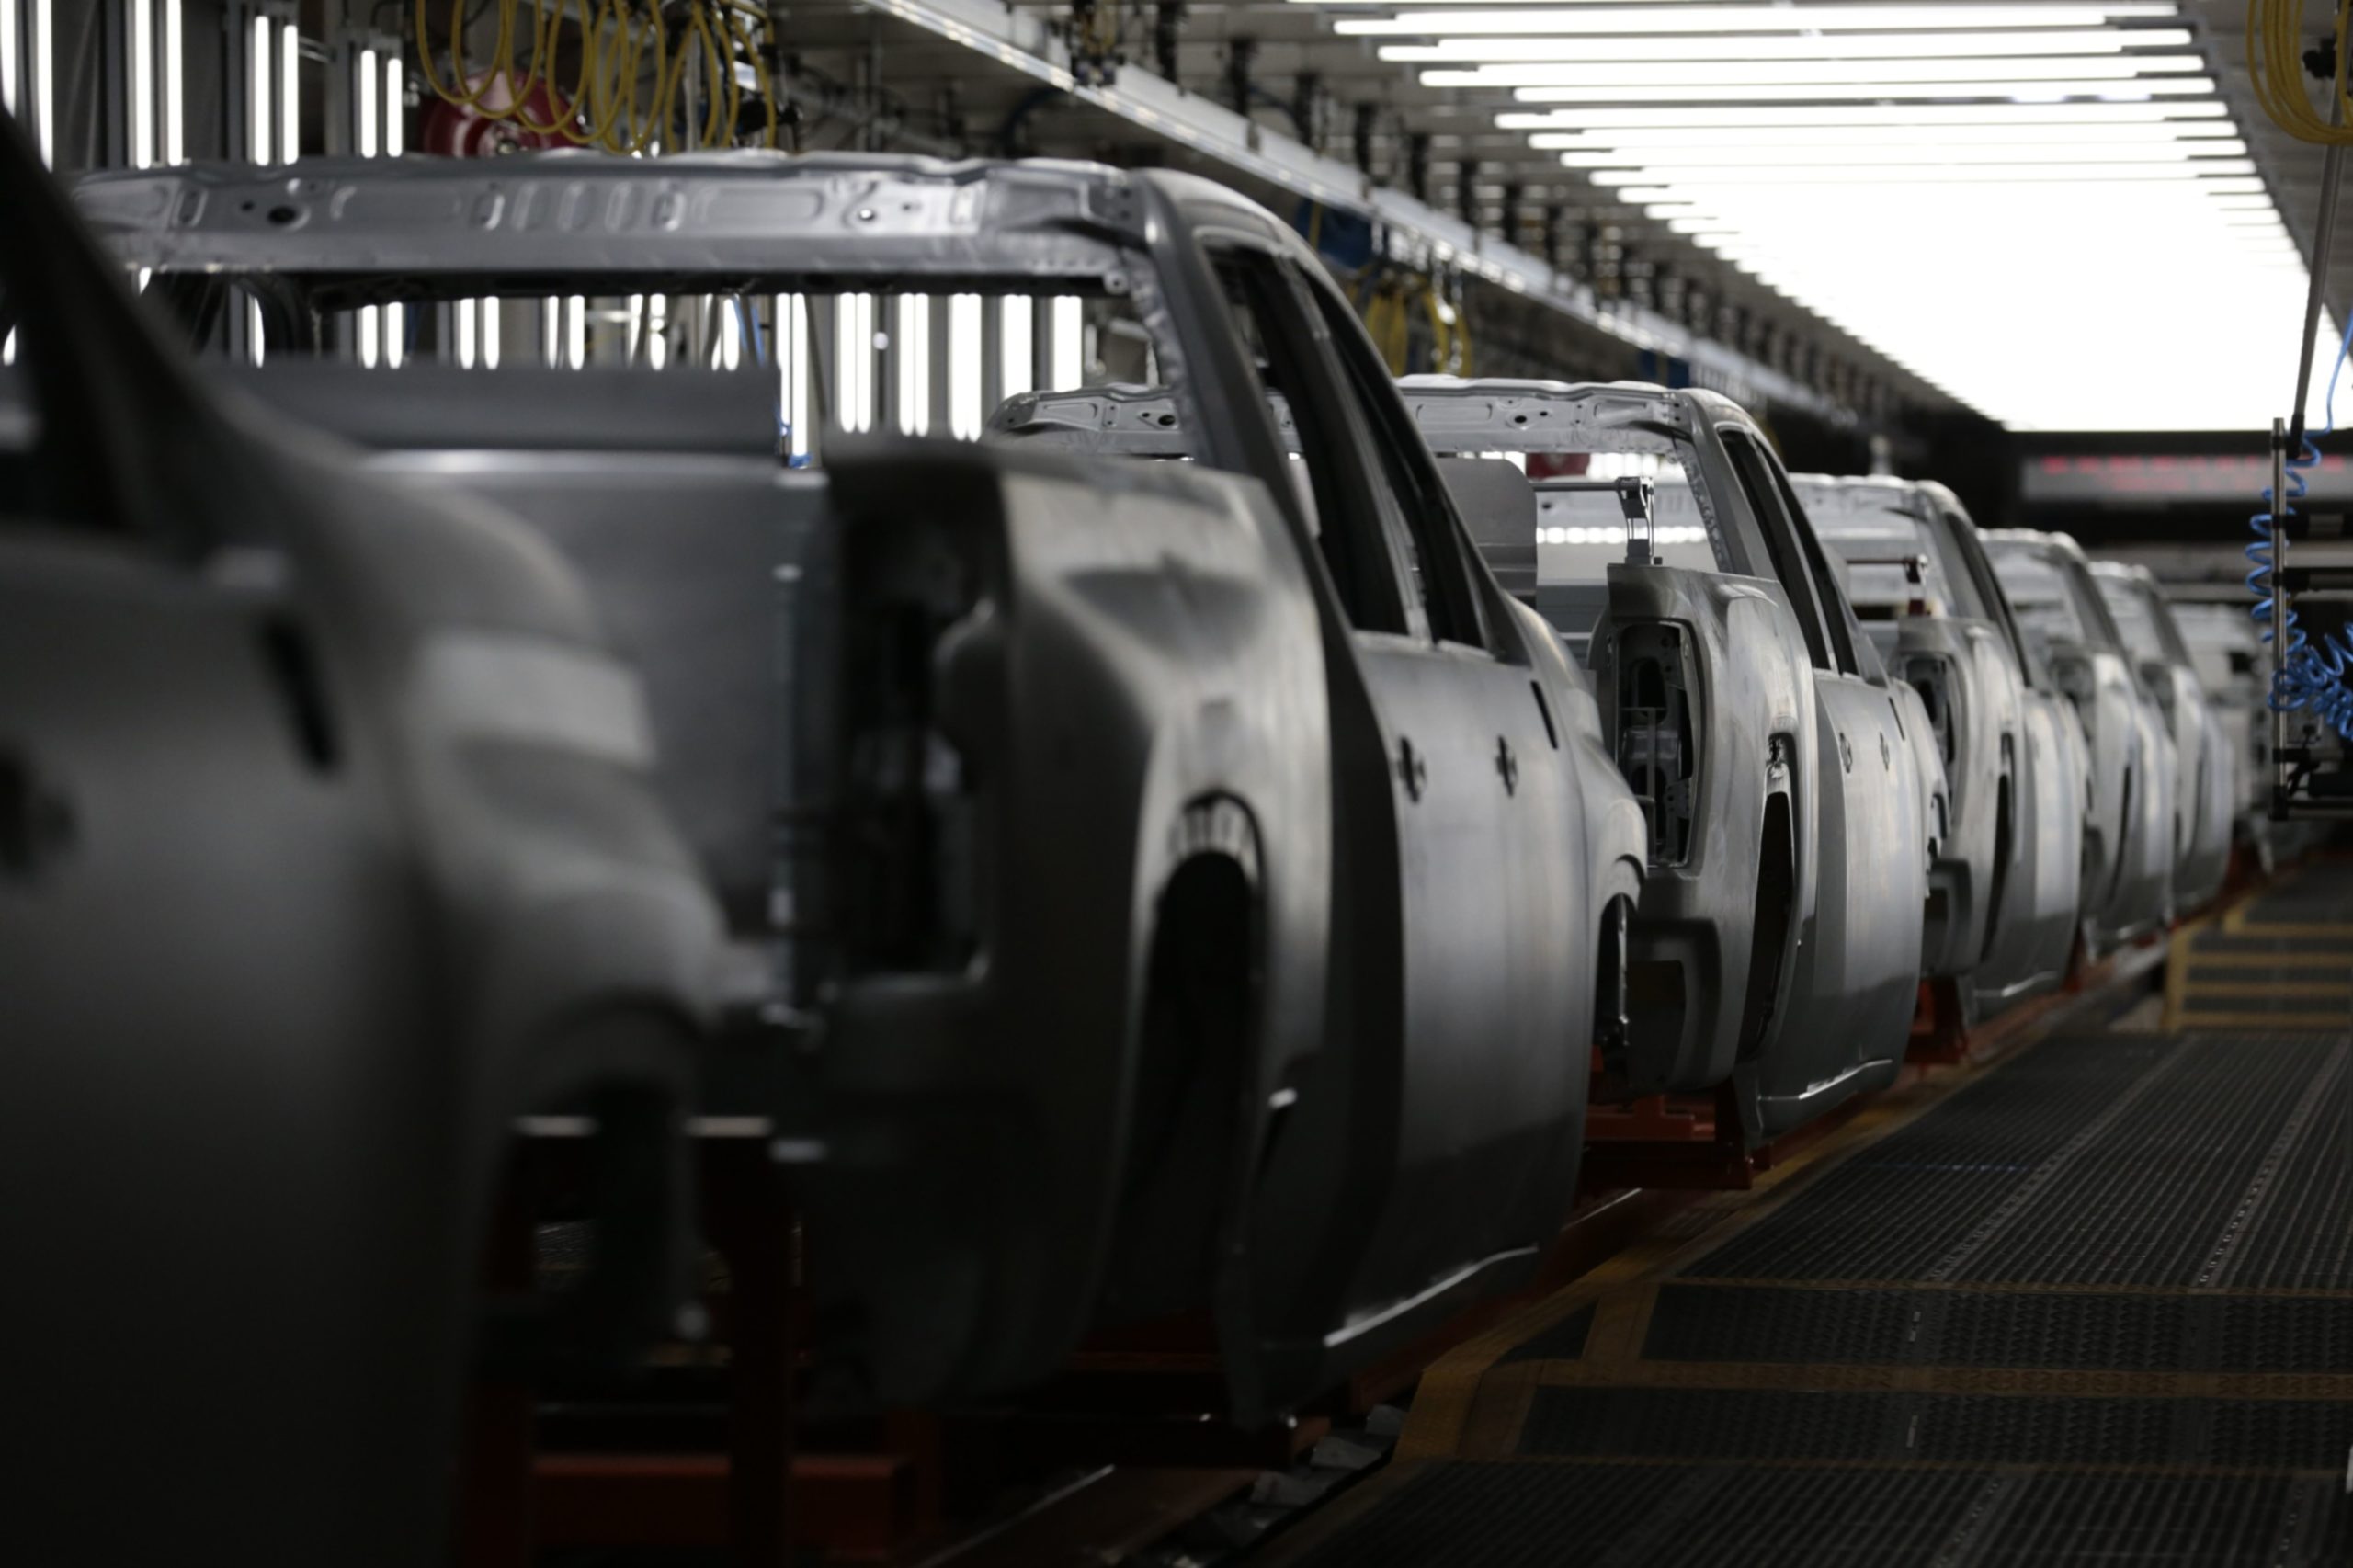 Pickup truck frames sit on the assembly line at the General Motors Co. plant in Flint, Michigan.